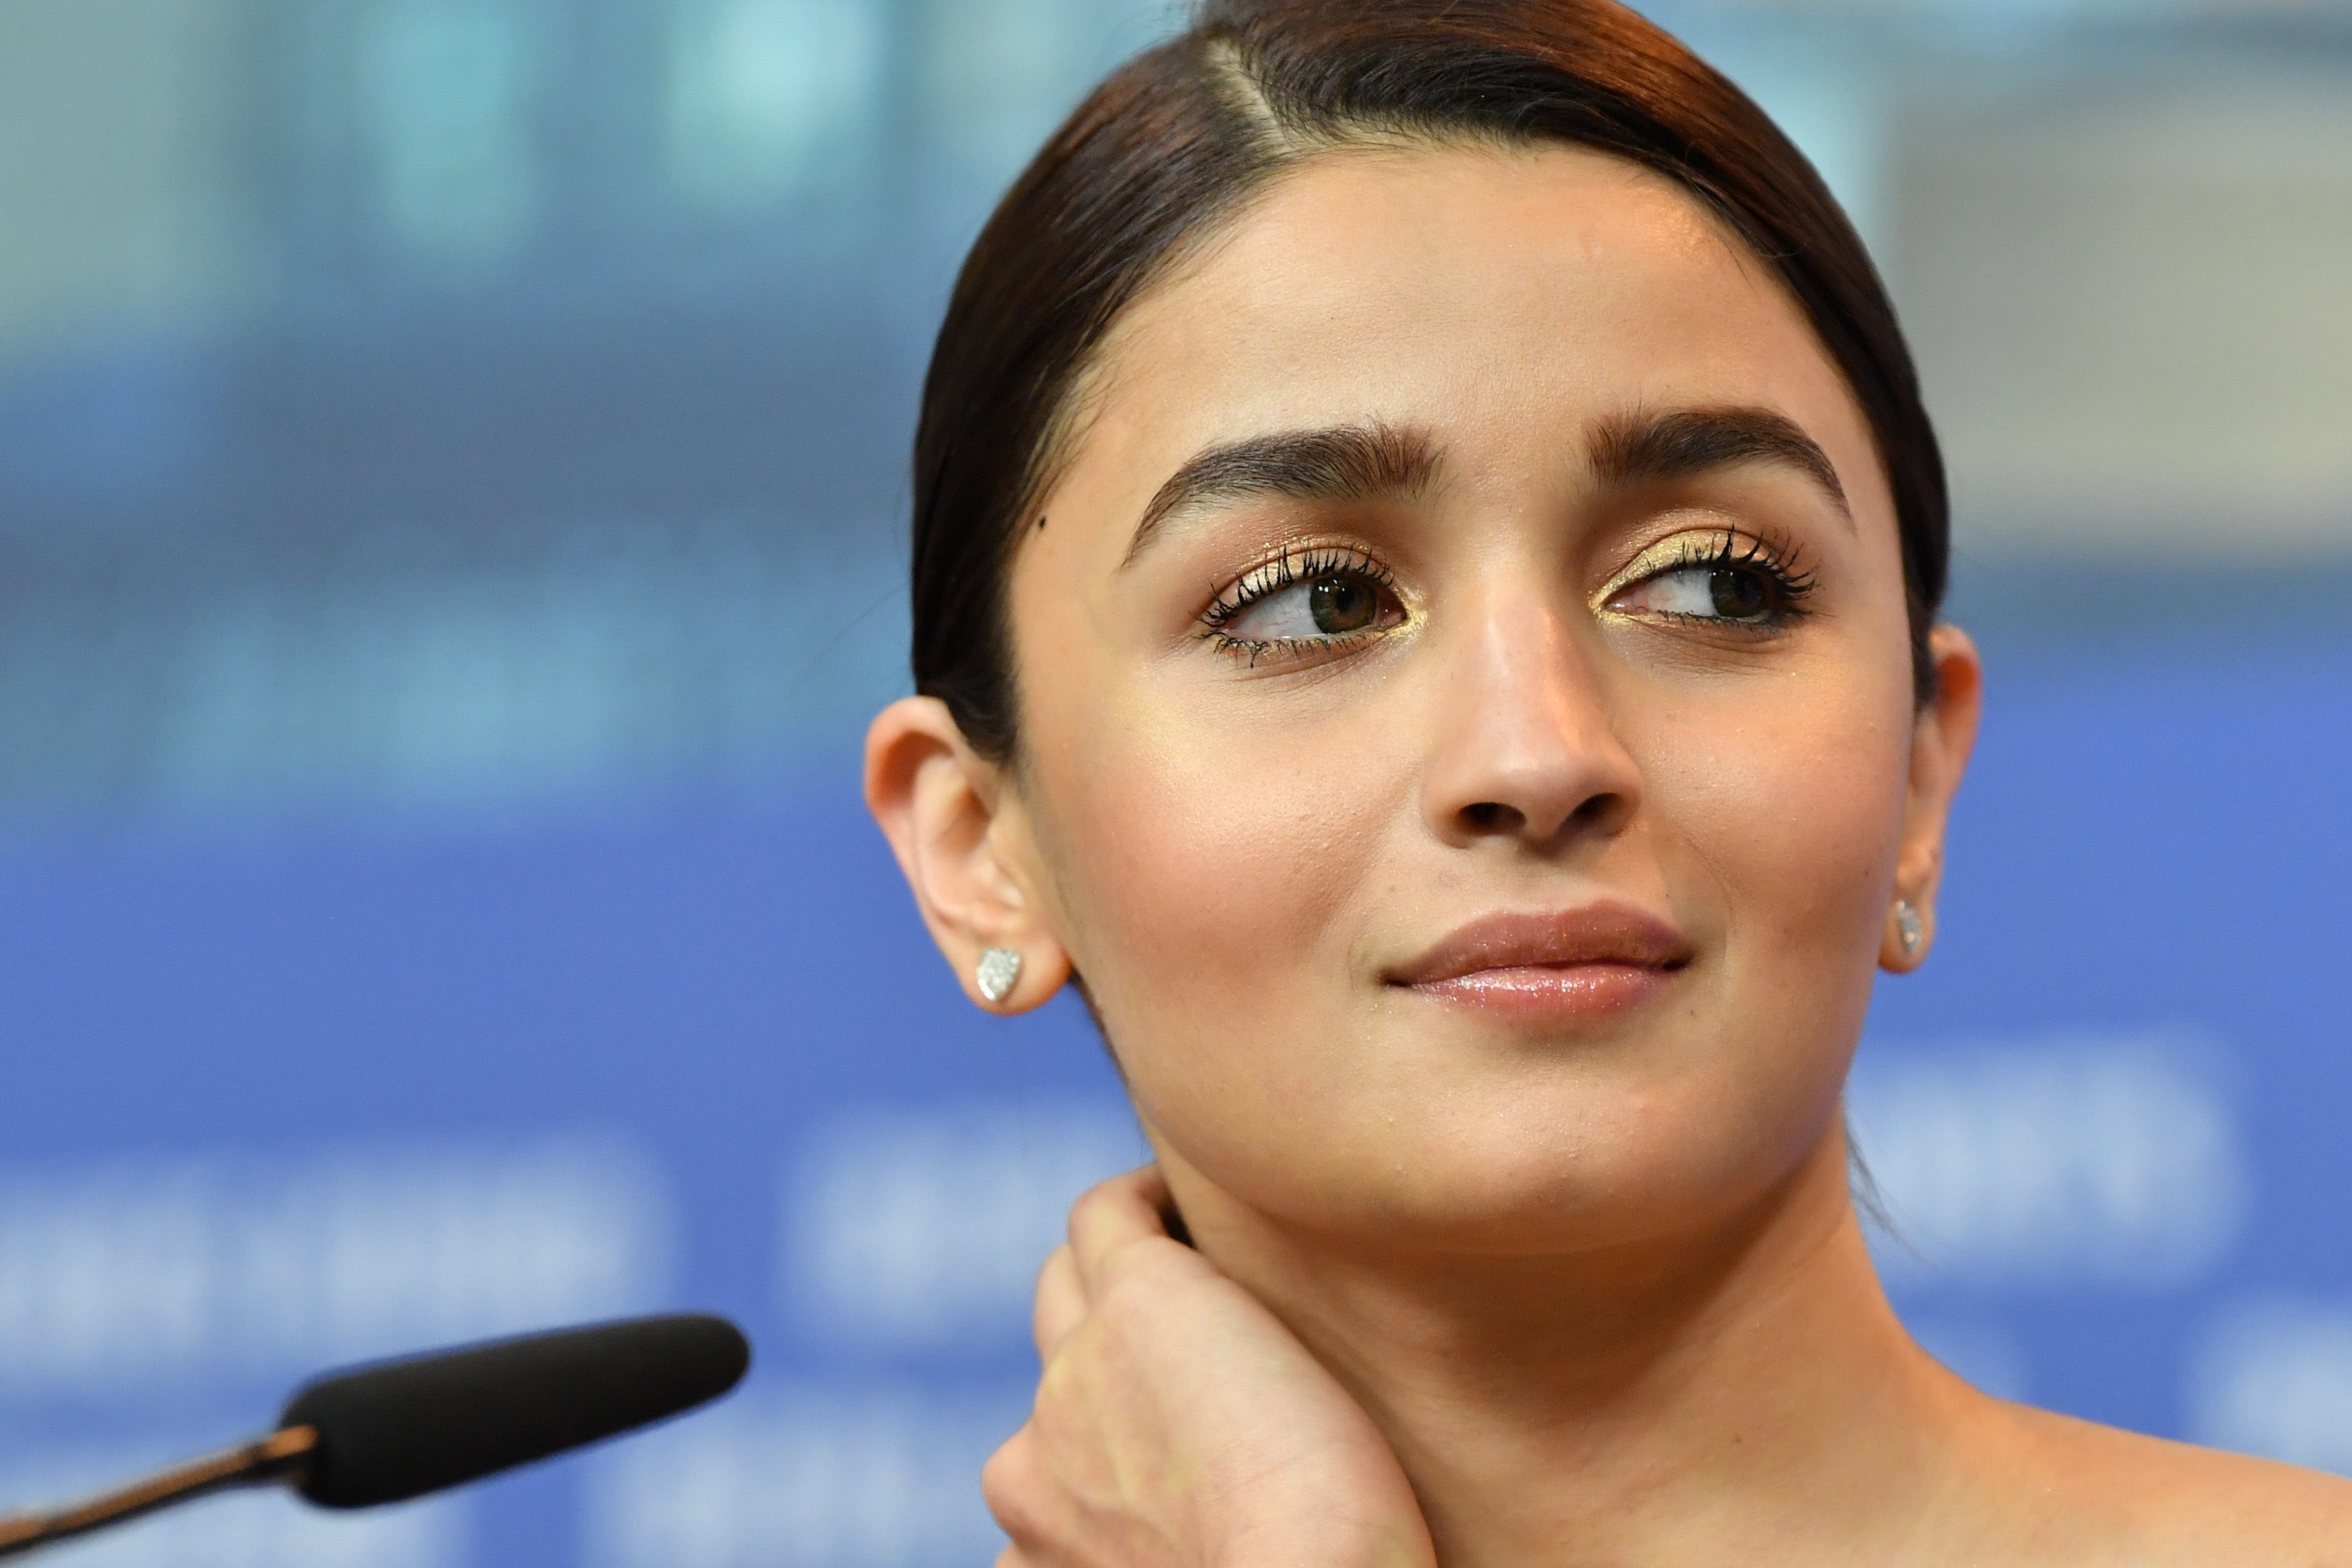 3648px x 2432px - Bollywood star Alia Bhatt calls out paparazzi for shots of her in privacy  of home: 'In what world is this OK?' | The Independent